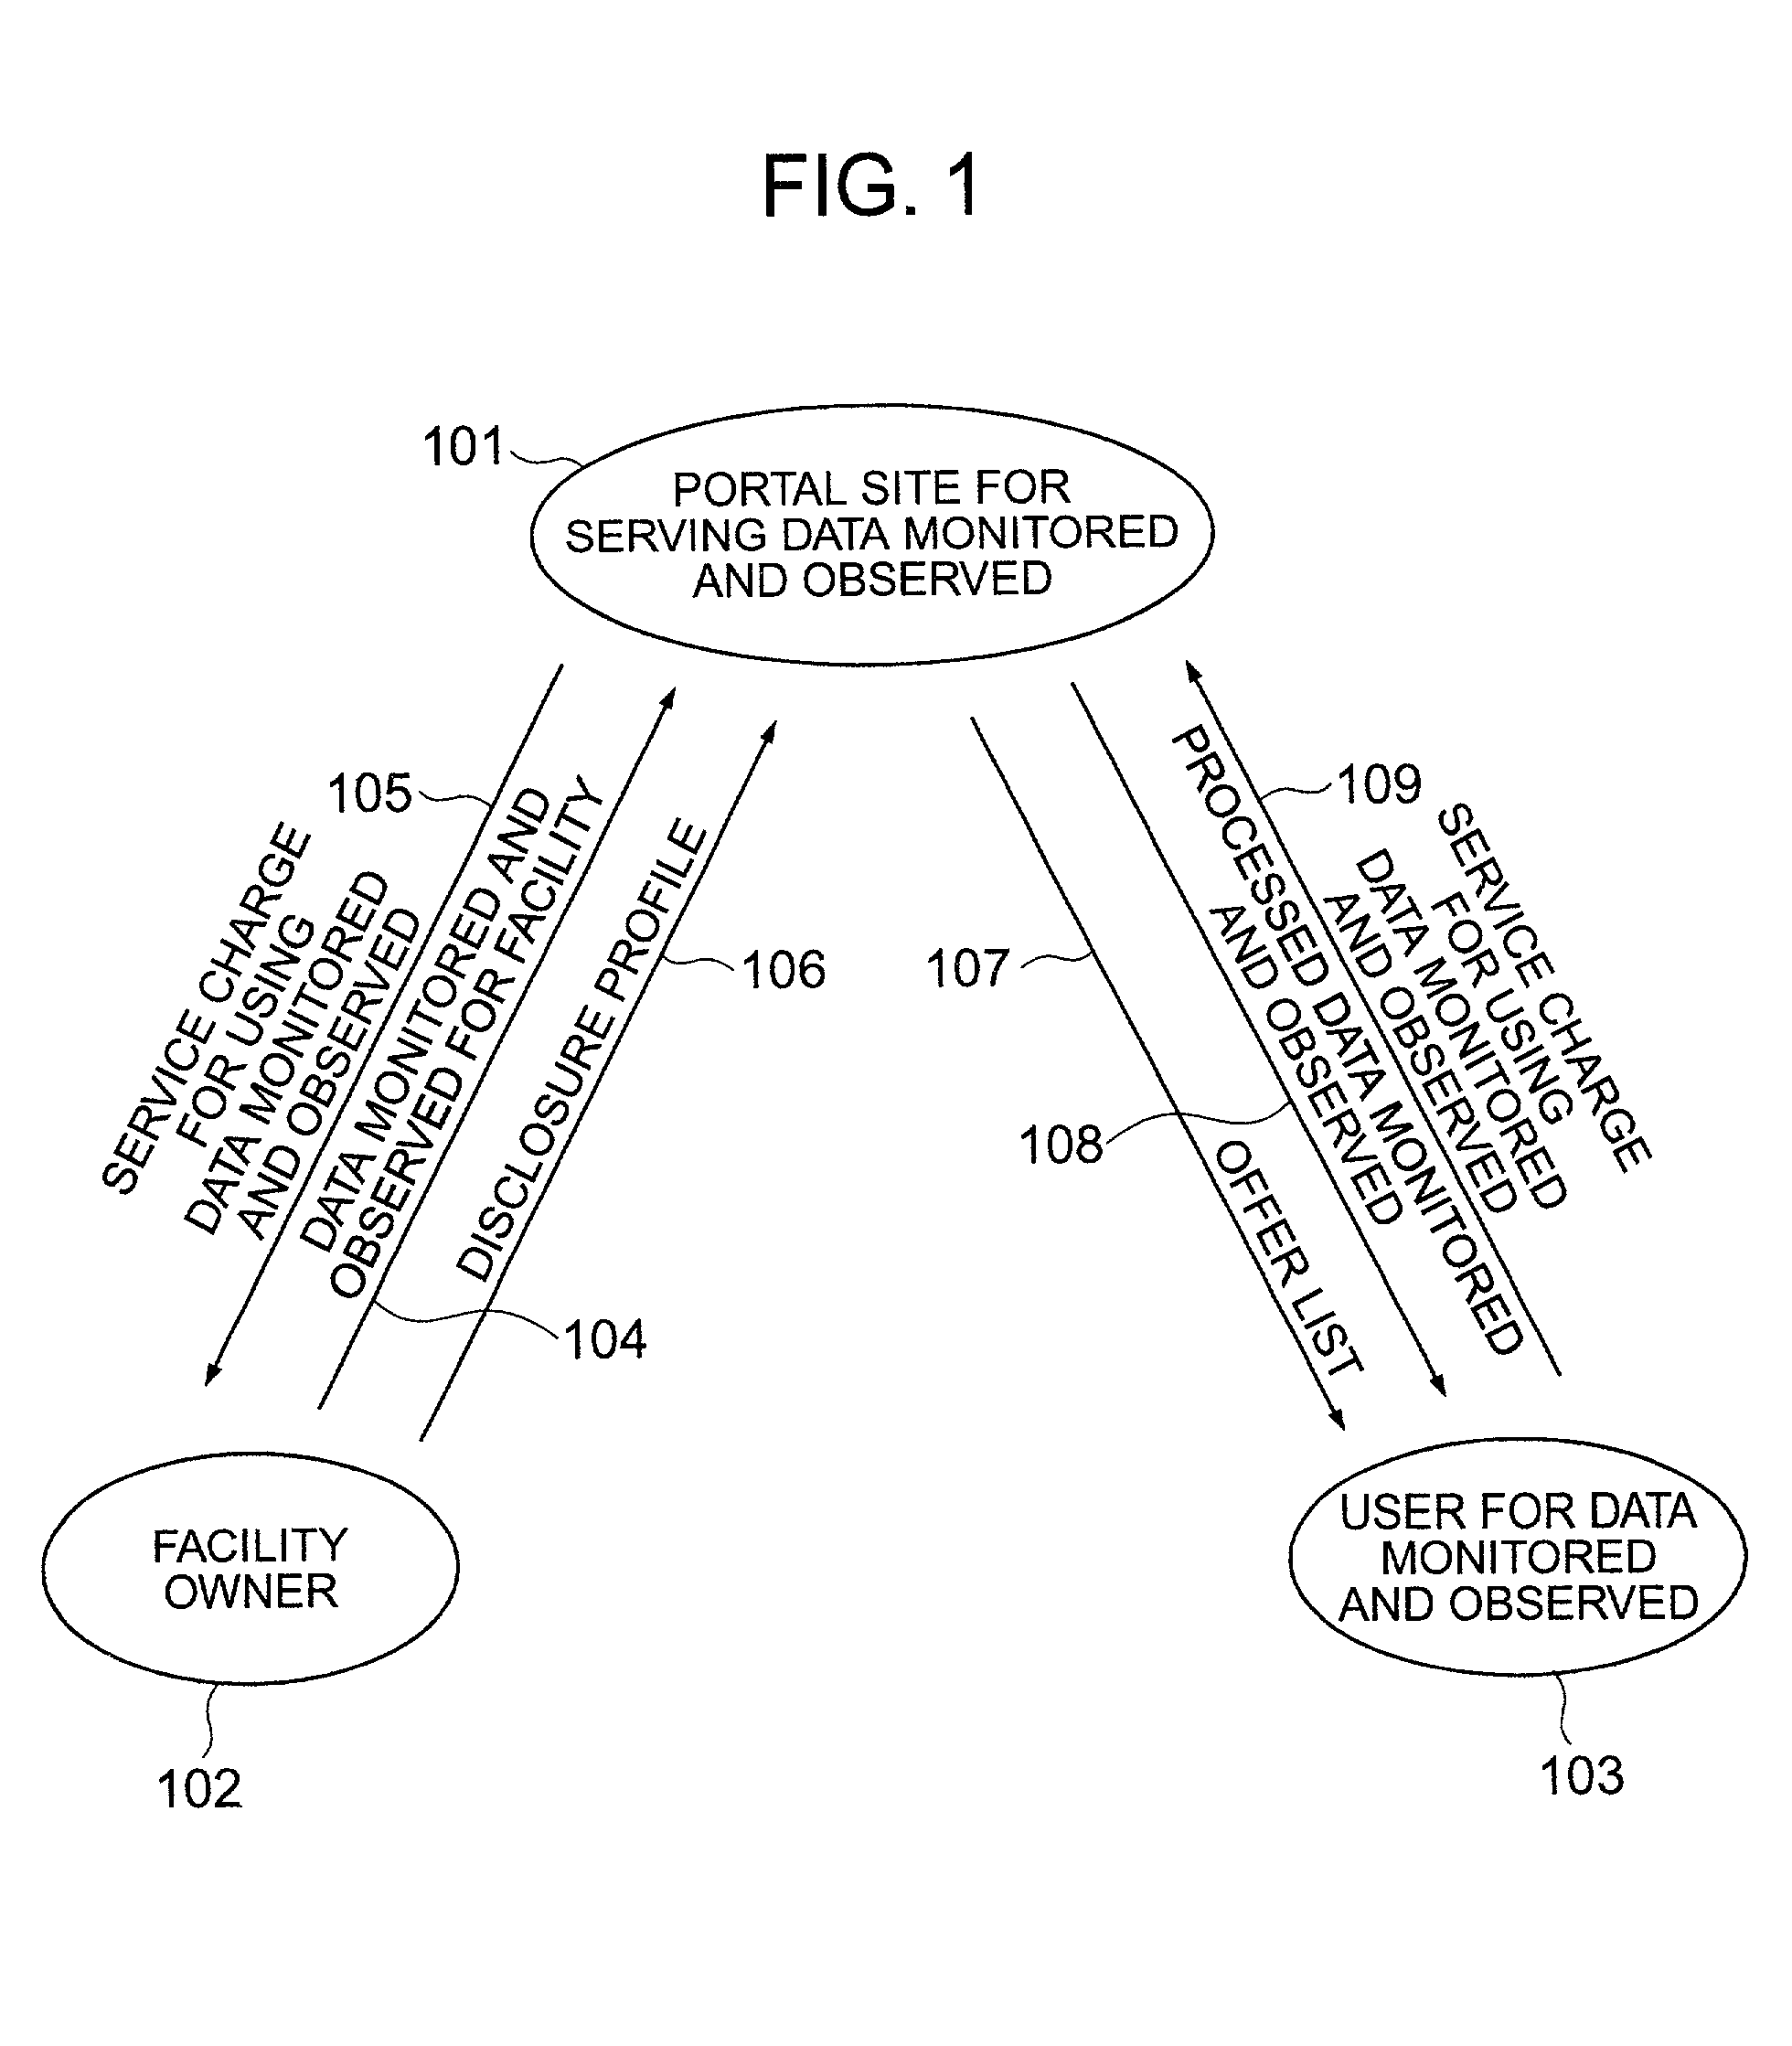 Portal site for serving data monitored and observed and method of using data monitored and observed